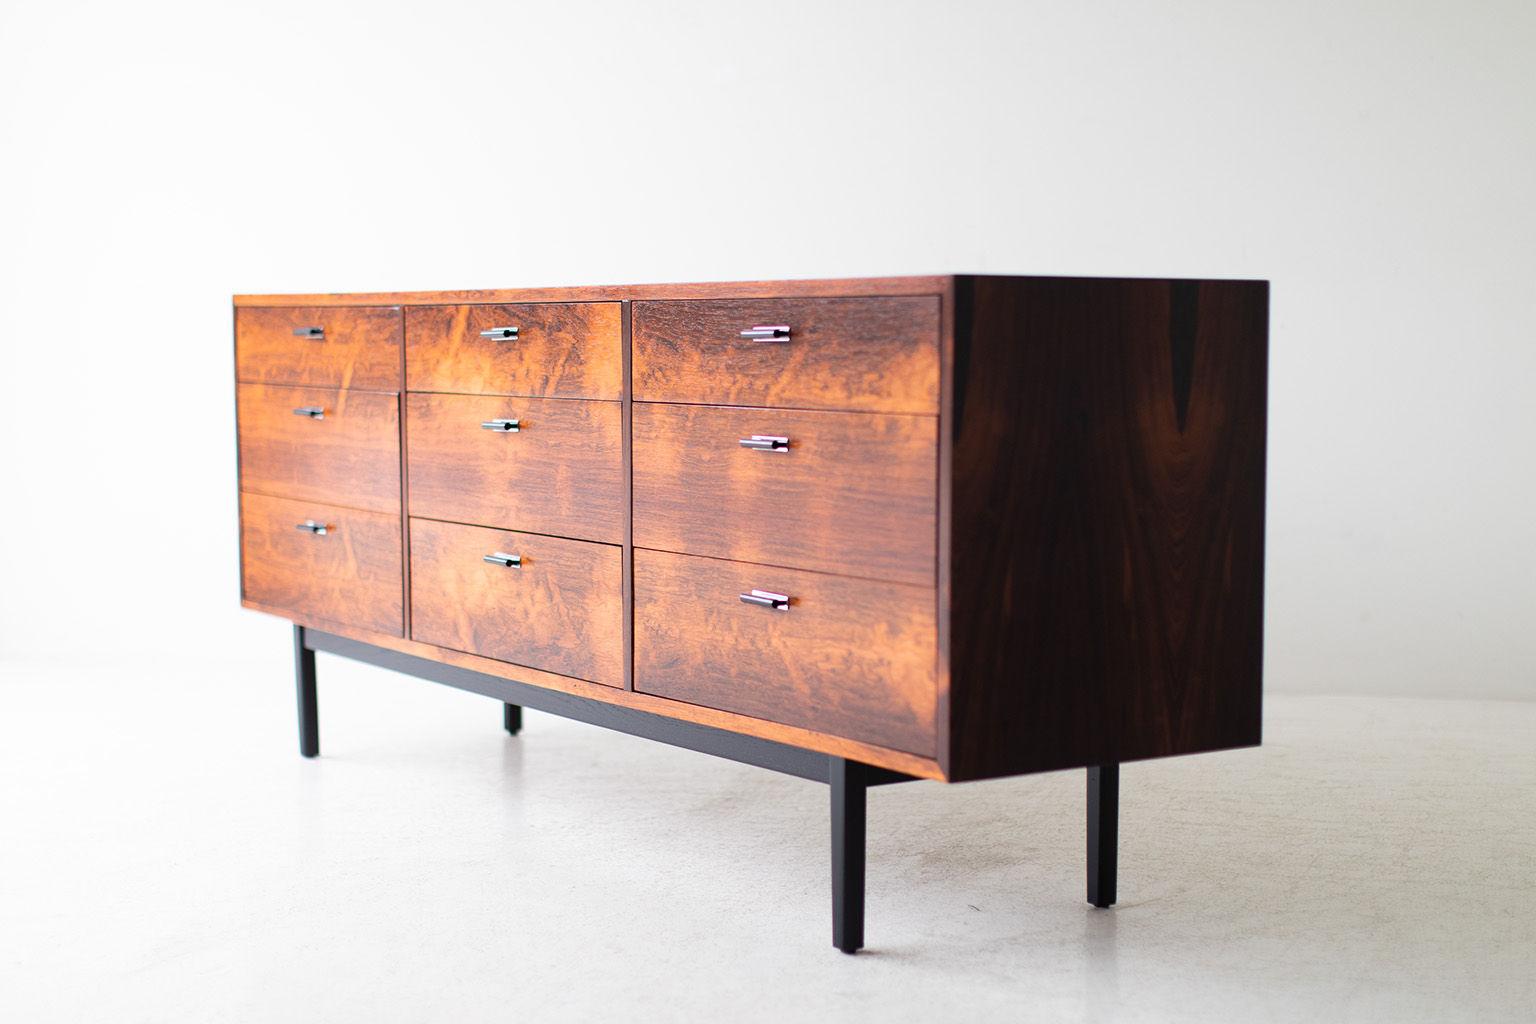 Designer: Jack Cartwright

Manufacturer: Founders
Period or model: Mid-Century Modern
Specs: Rosewood, Oak

Condition:

This Jack Cartwright credenza or dresser for Founders is in excellent restored condition. It was design in 1961 and part